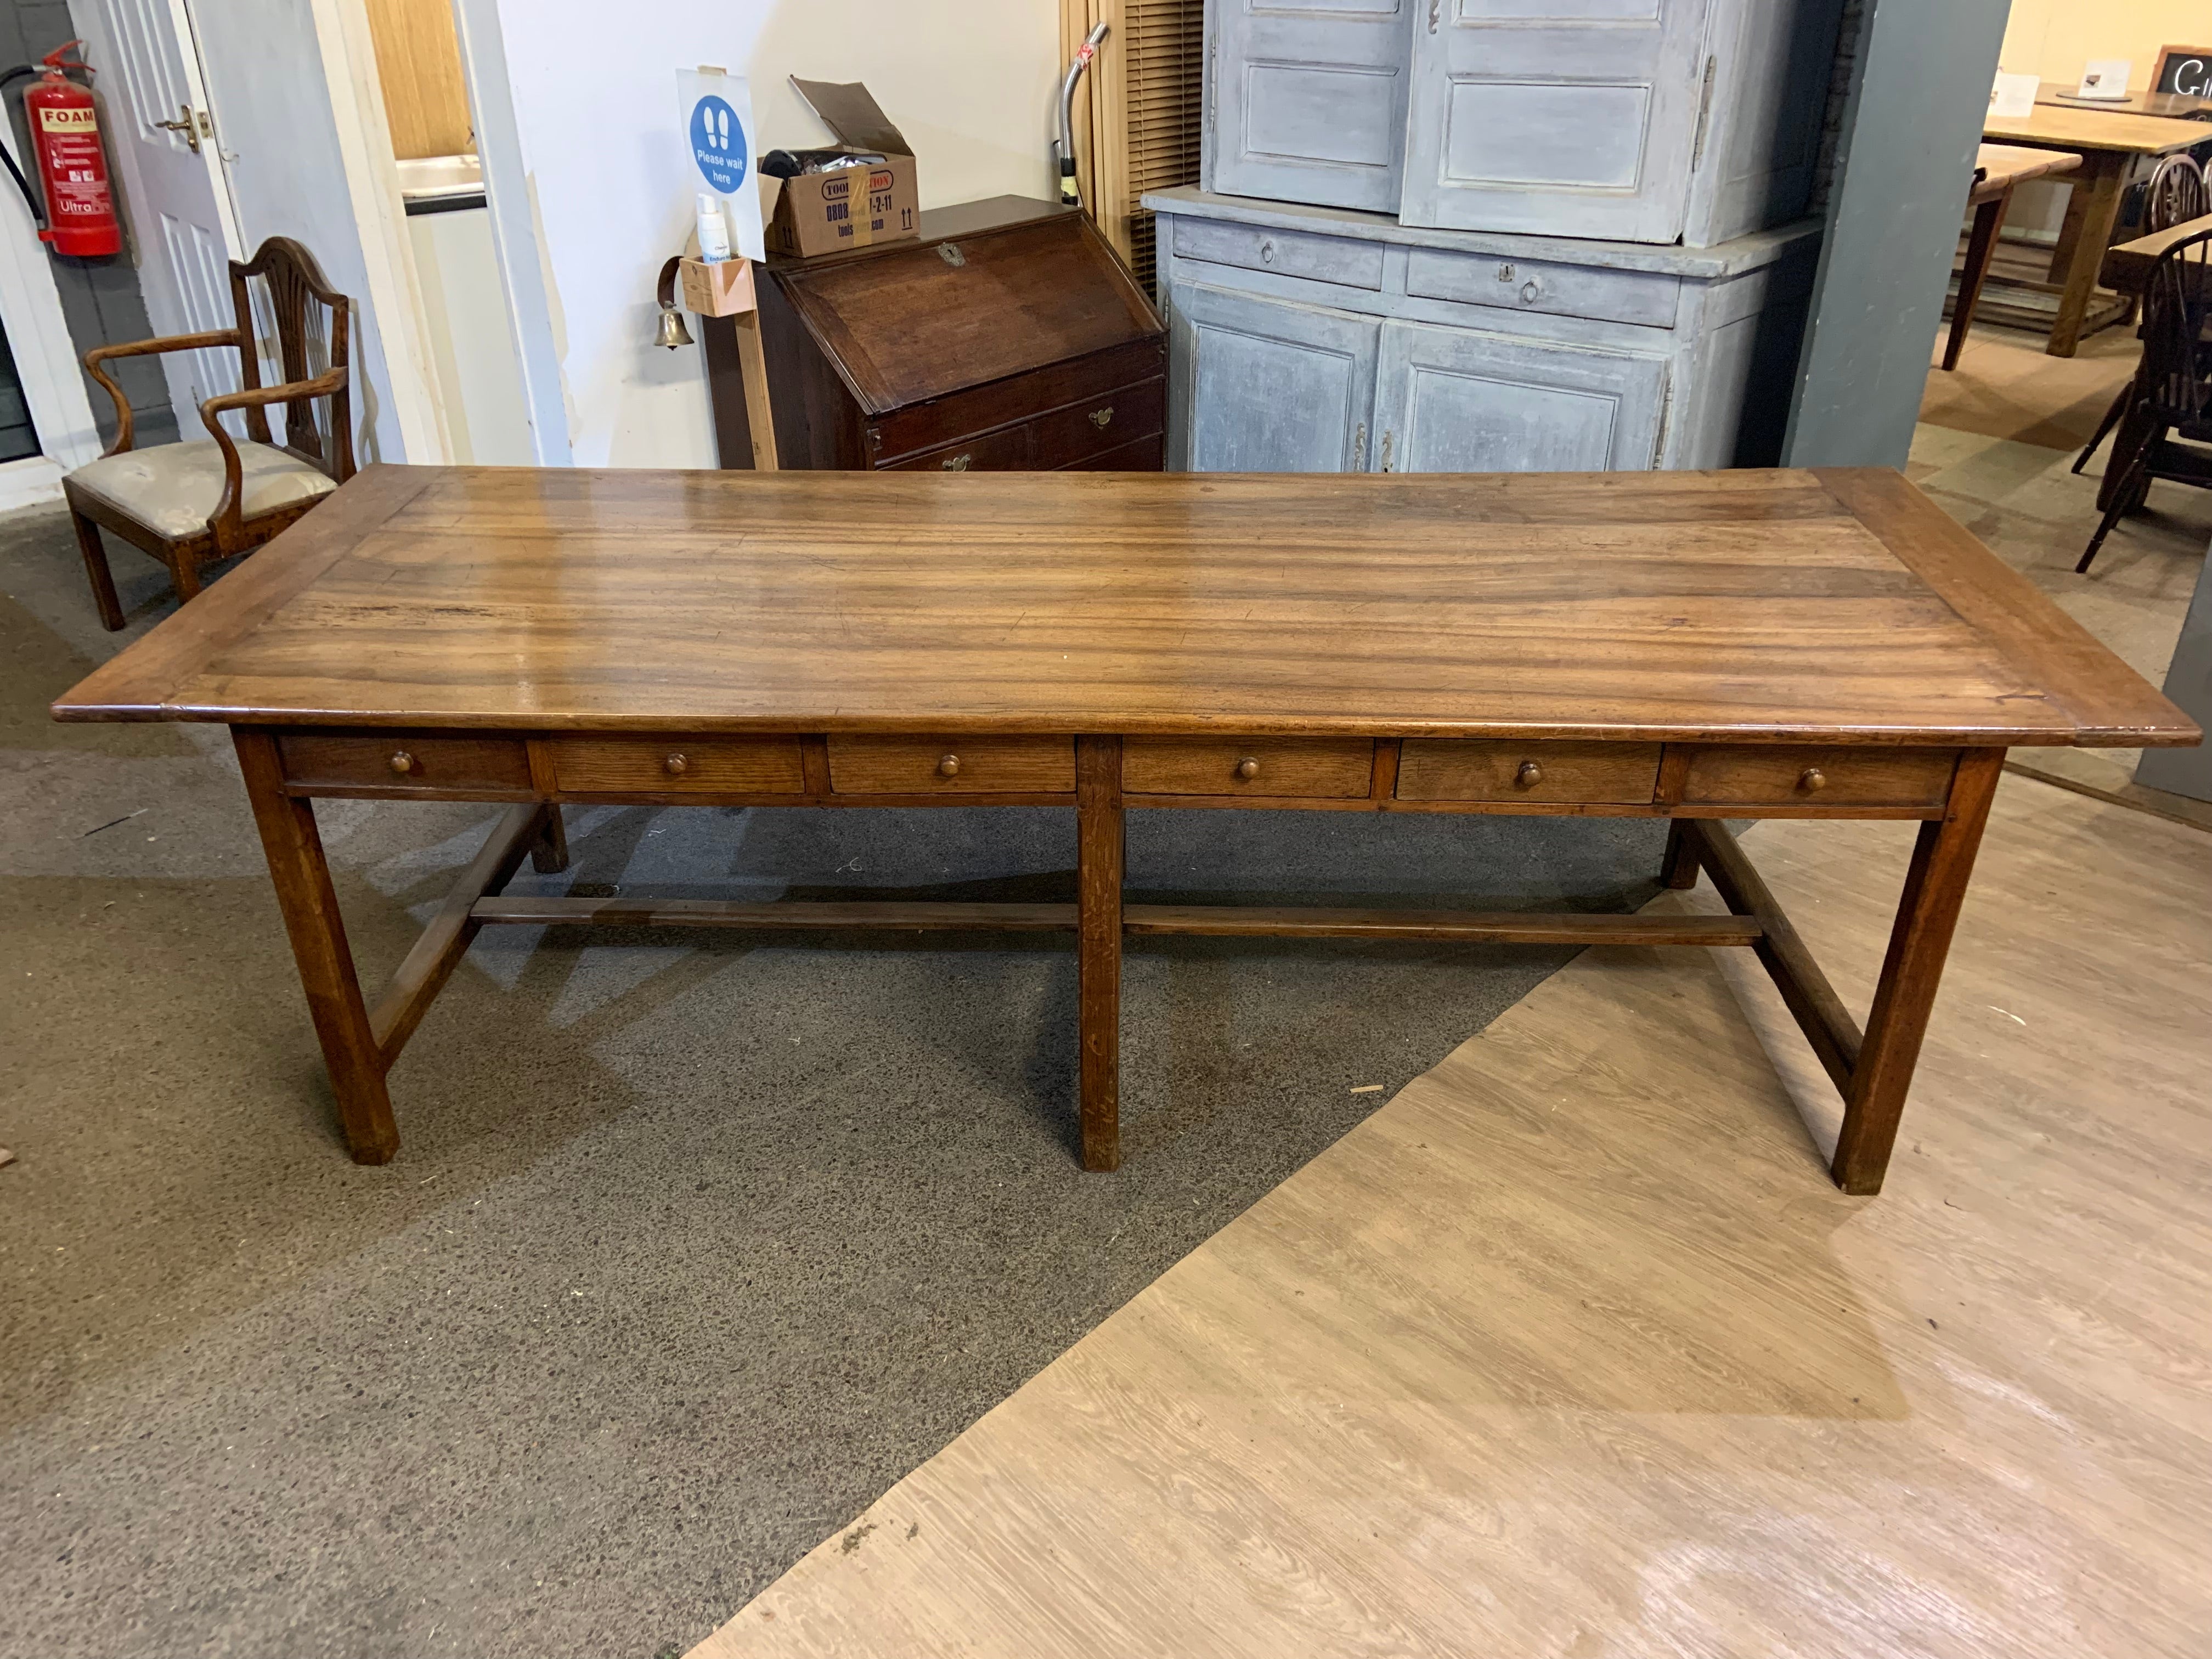 19th century walnut Monastery table with twelve drawers. The table sits on a sturdy oak base and has twelve lovely drawers. The drawers are all zinc lined and have wooden knobs. The base is joined by six legs and a centre stretcher. The top is a